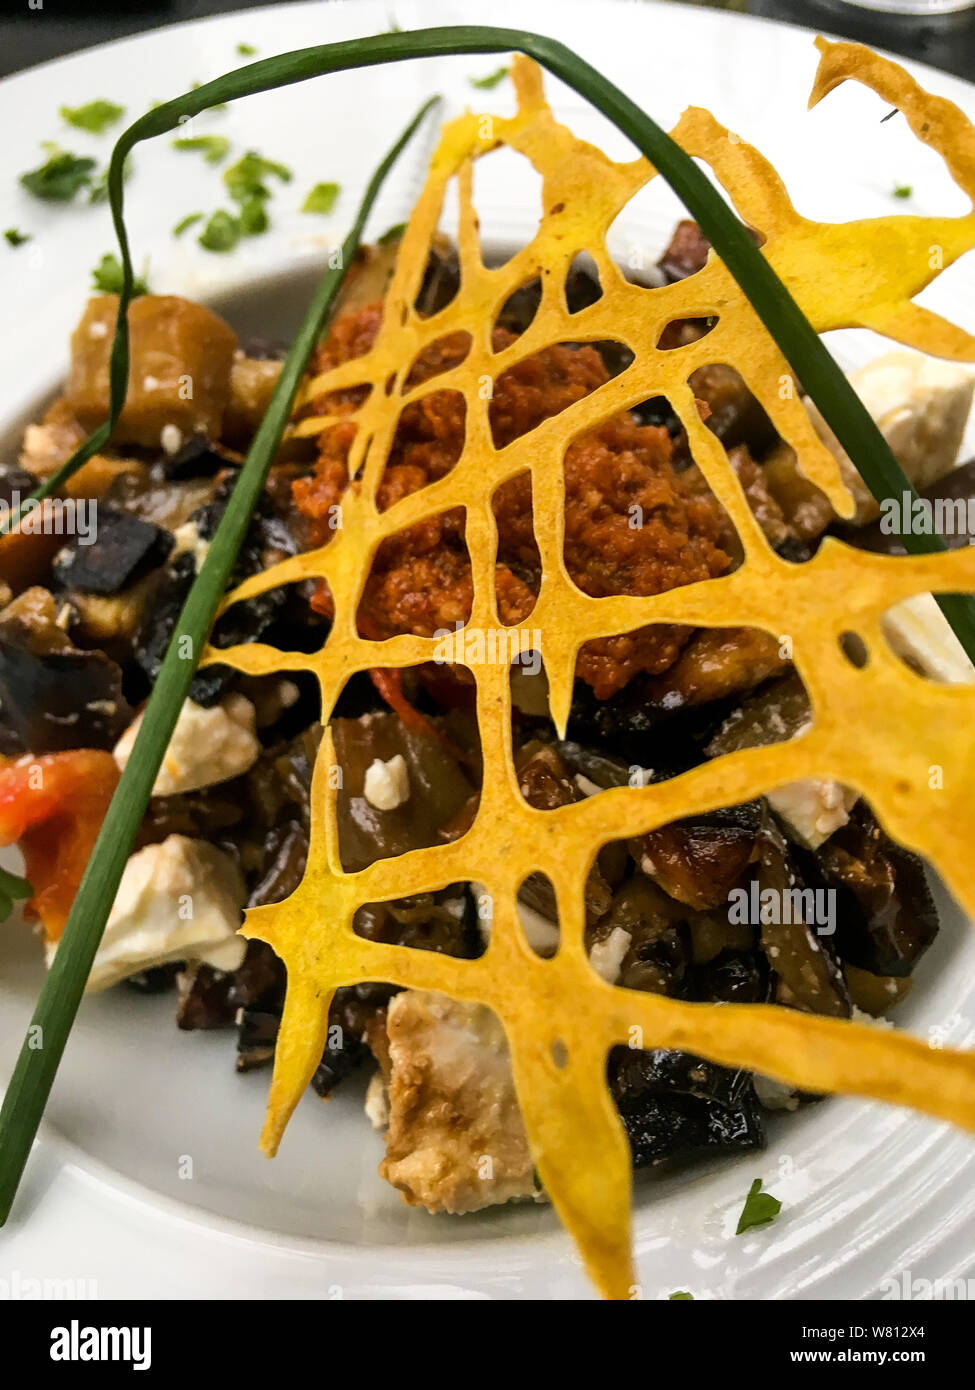 Vegetarian dish putted on a table, Alès, Gard, France Stock Photo